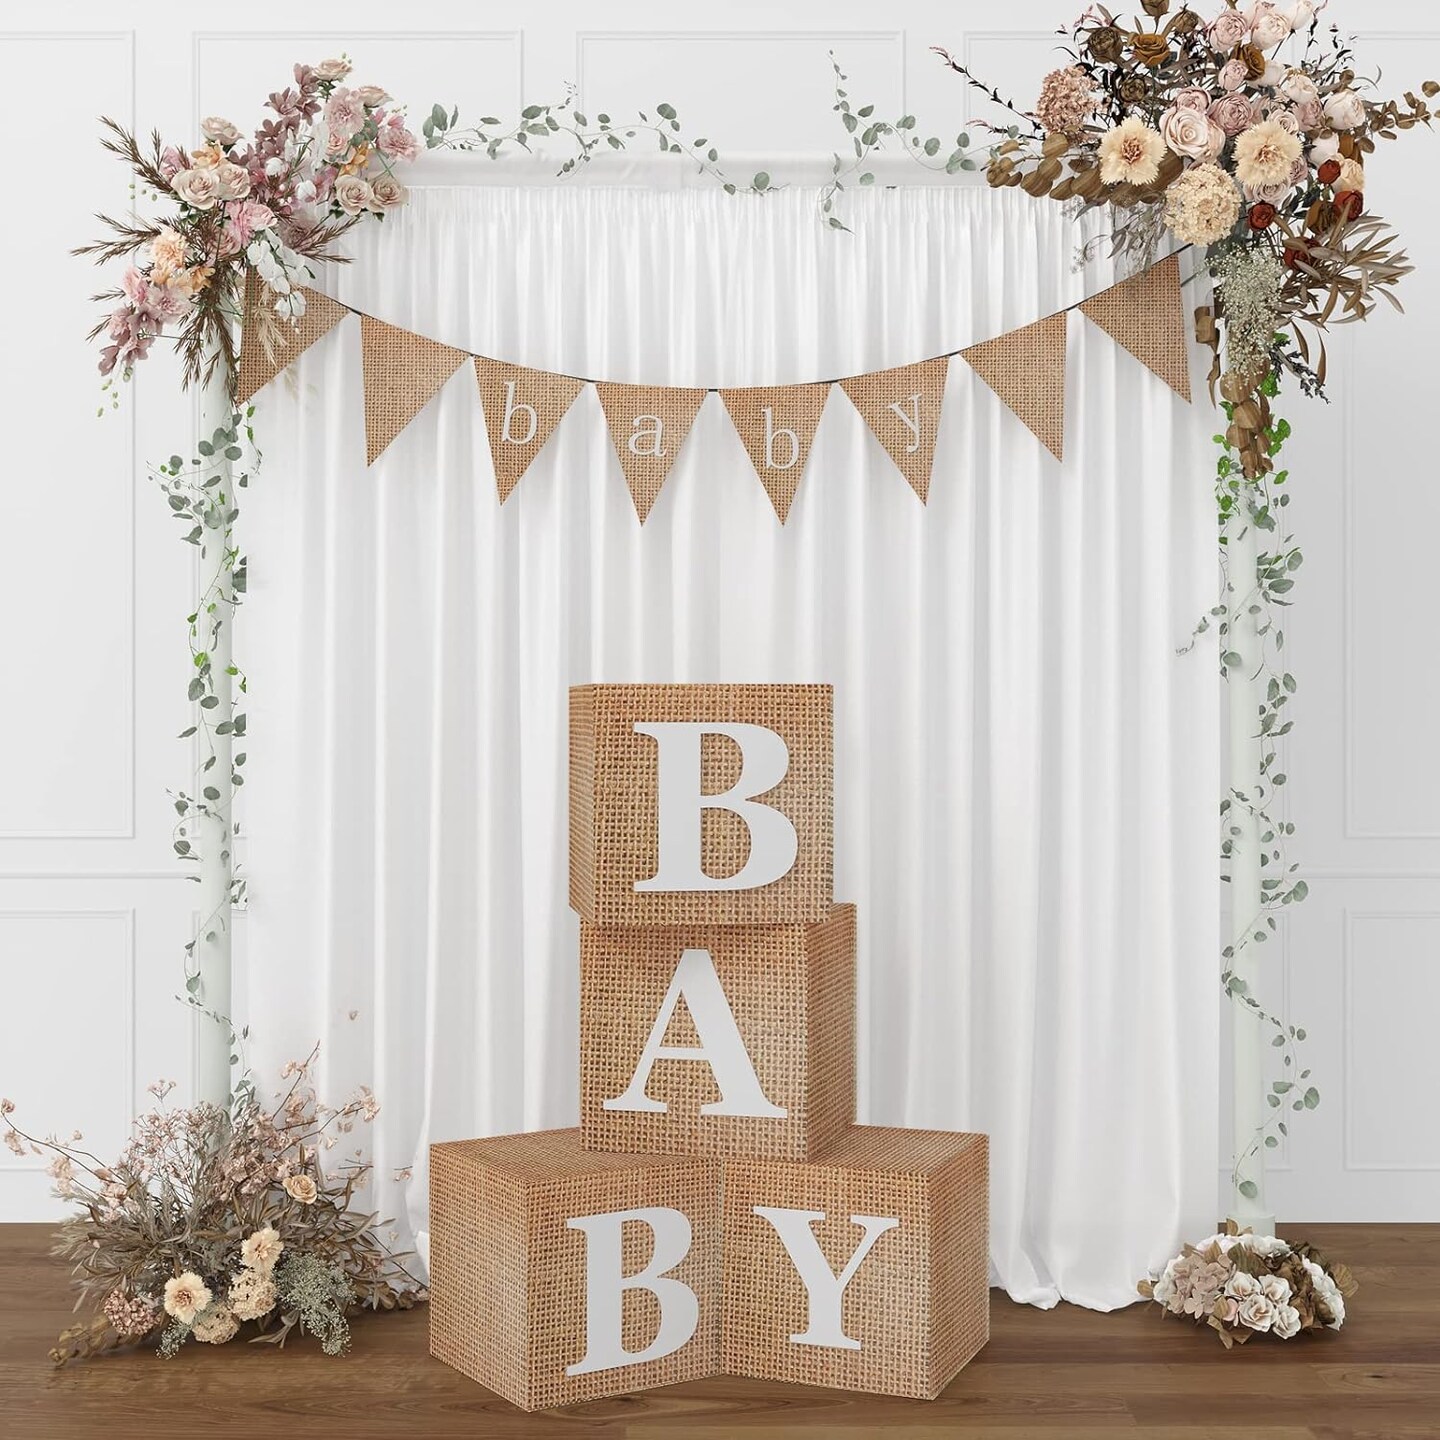 Baby Boxes with Letters for Baby Shower, 4pcs Rustic Farmhouse Style Boho Balloon Boxes with Burlap Grain for Birthday Gender Reveal Decoration Backdrop Photo Props